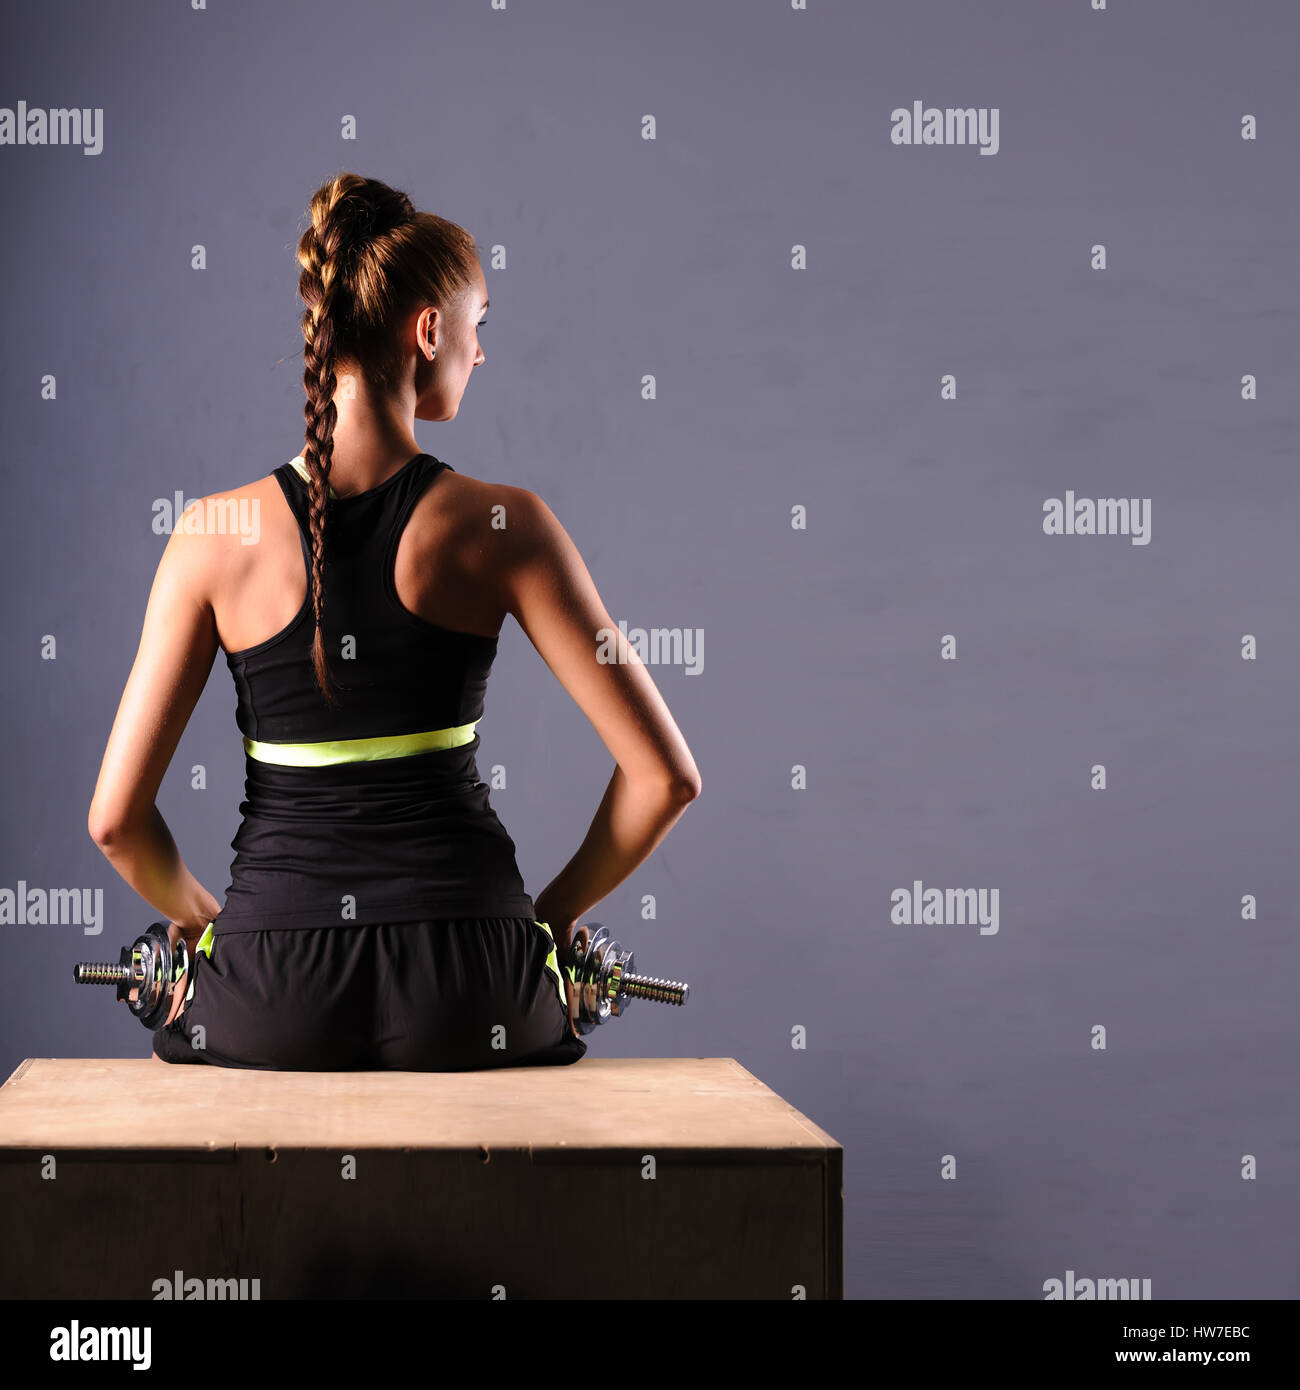 Fit young woman doing shoulder raises with dumbbells, isolated ongray background. Stock Photo